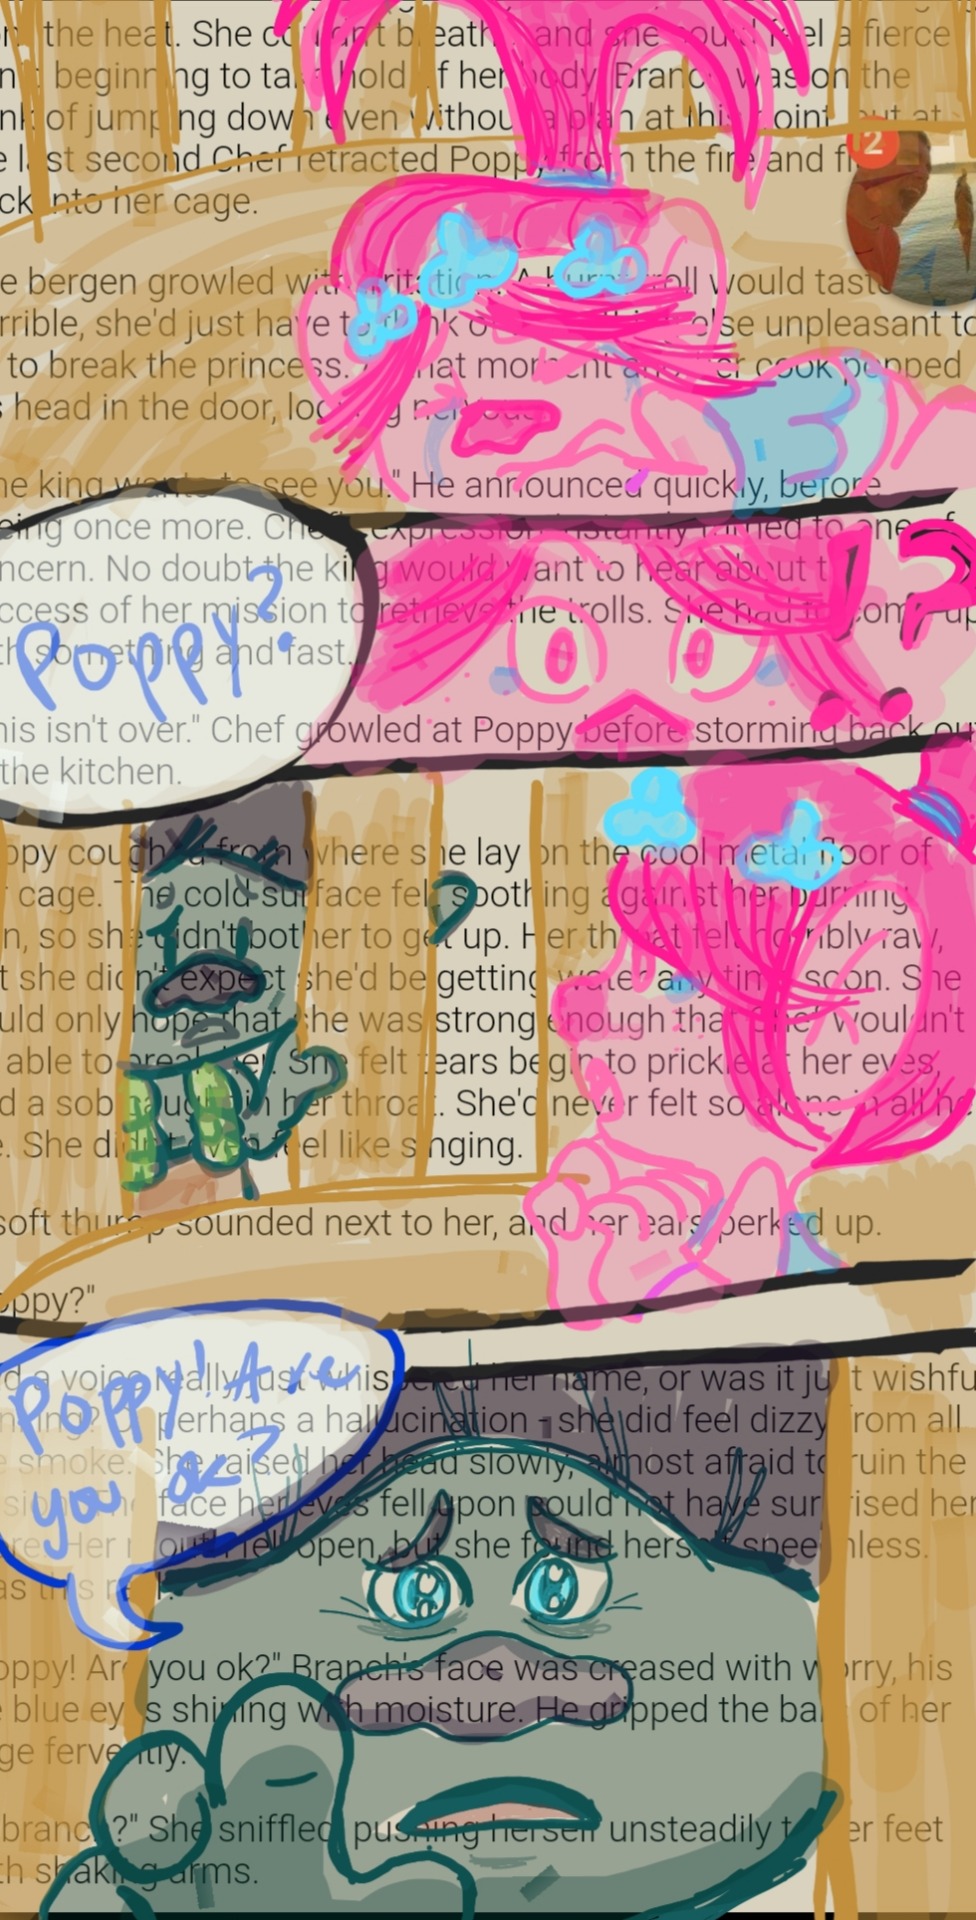 Another doodle over a story. Just ignore the Facebook chat bubble in the corner lol. This is also from a few months back. I remember in this story poppy is taken by chef instead of the snack pack.
The story I believe is titled Taken. I don’t remember...